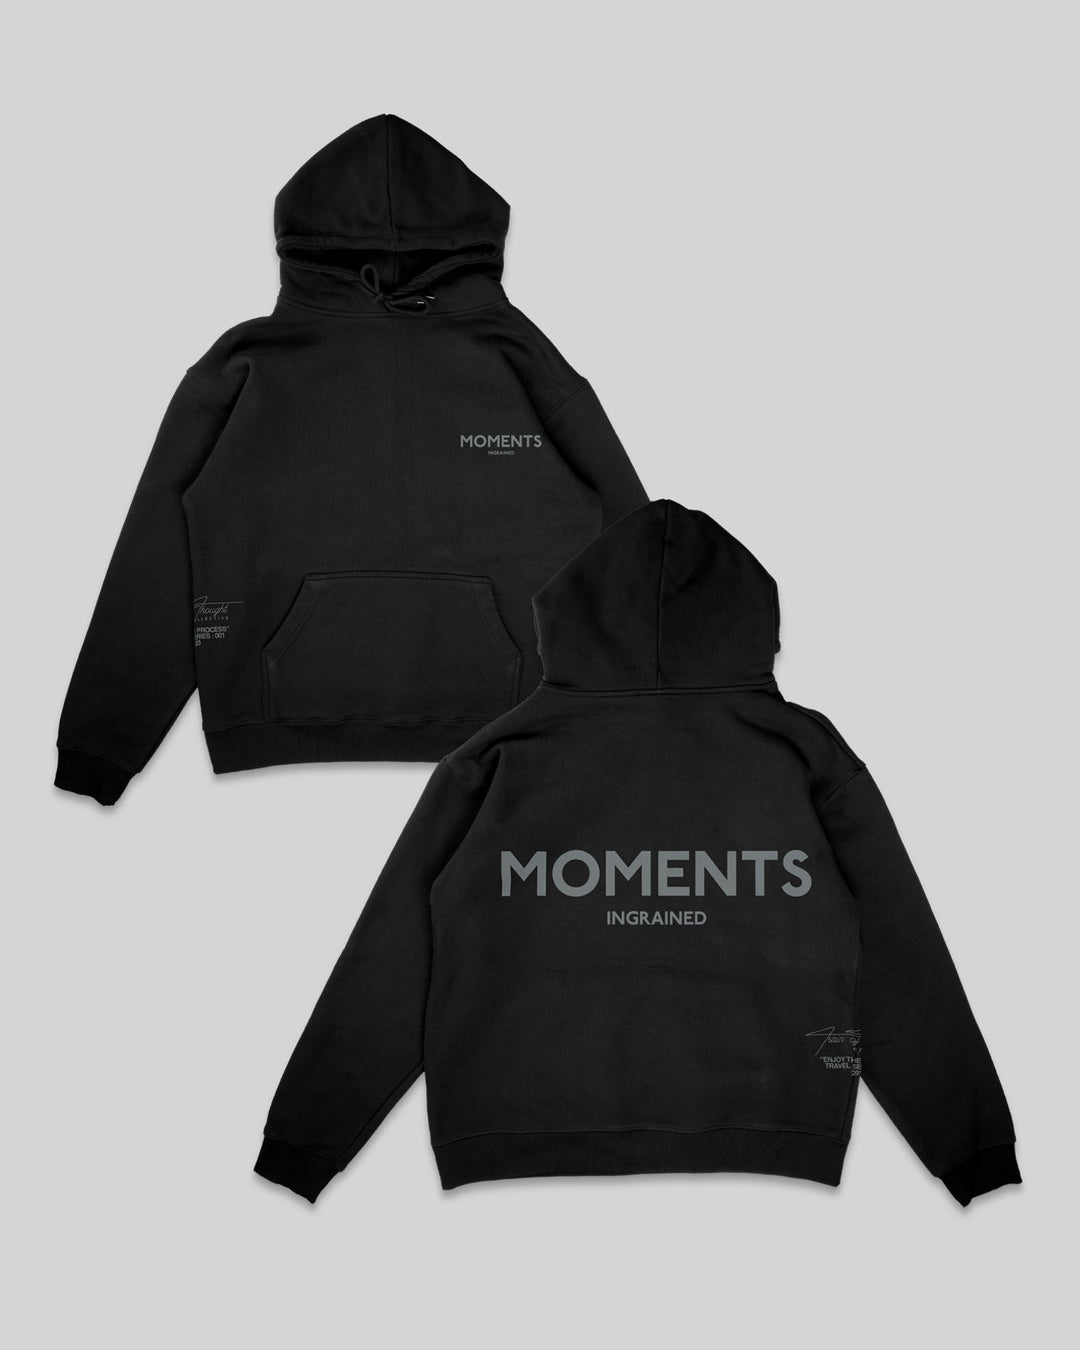 Moments Ingrained Black Hoodie - trainofthoughtcollective